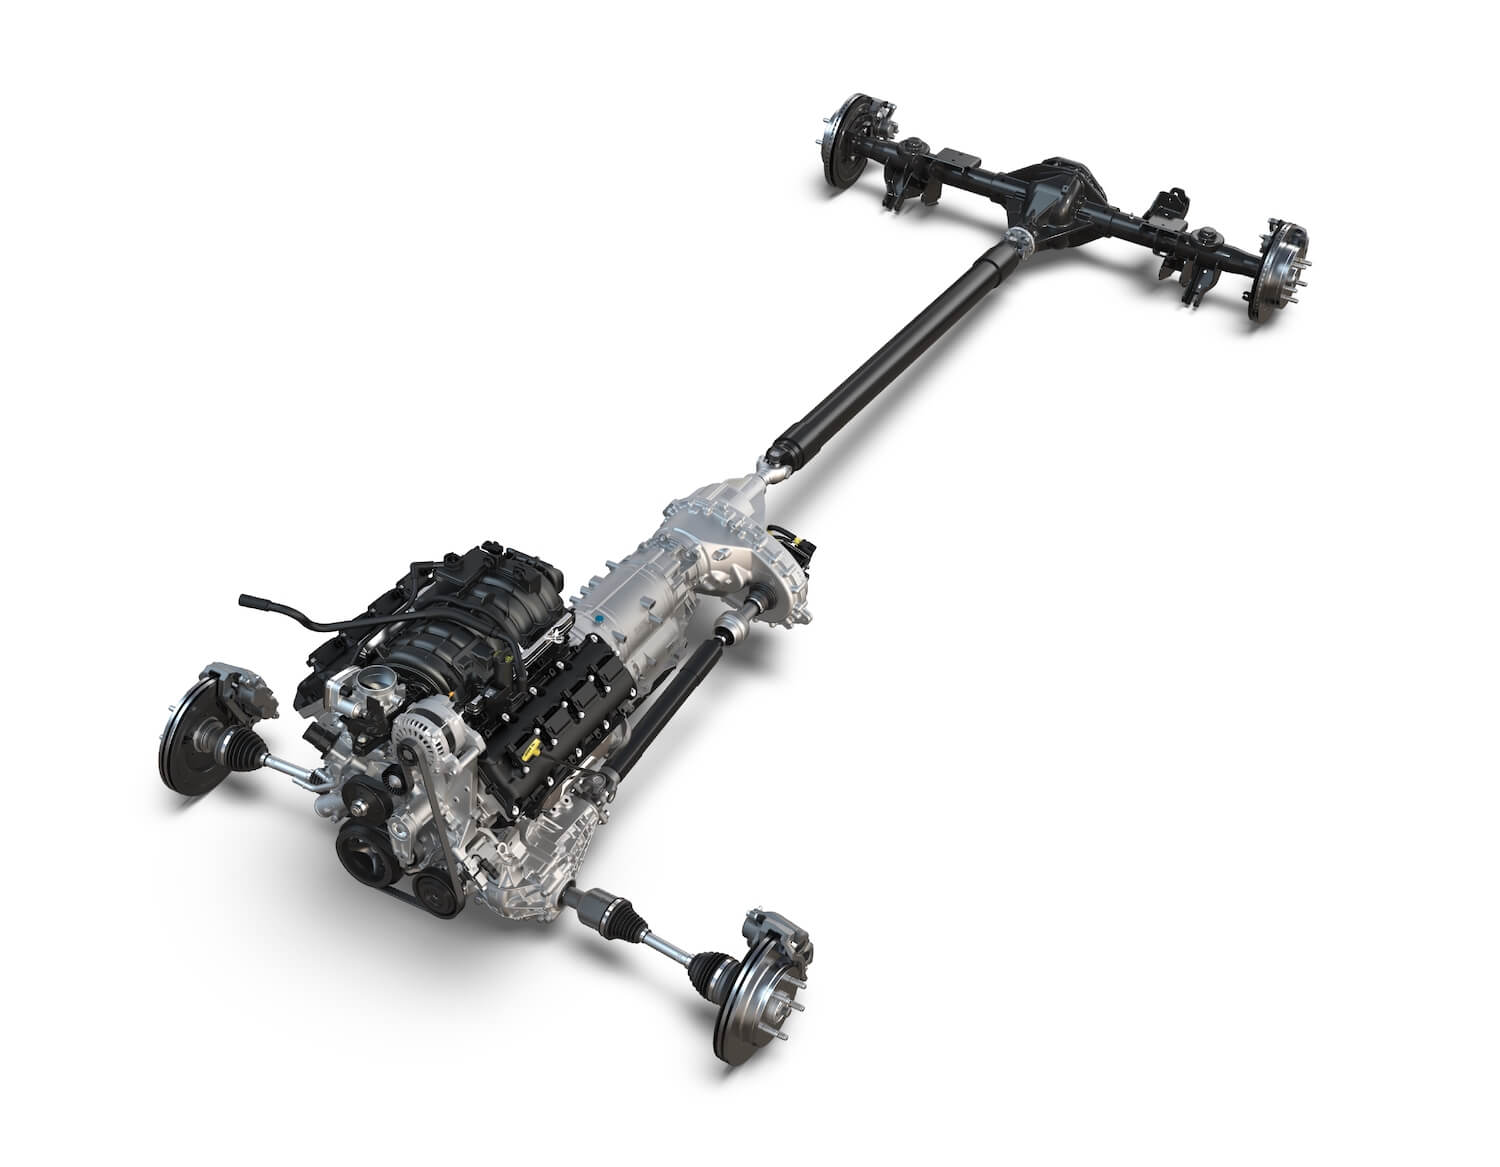 Isolated Ram 1500 powertrain with a 5.7-liter Hemi V8 and 8-speed ZF transmission set against a white background.